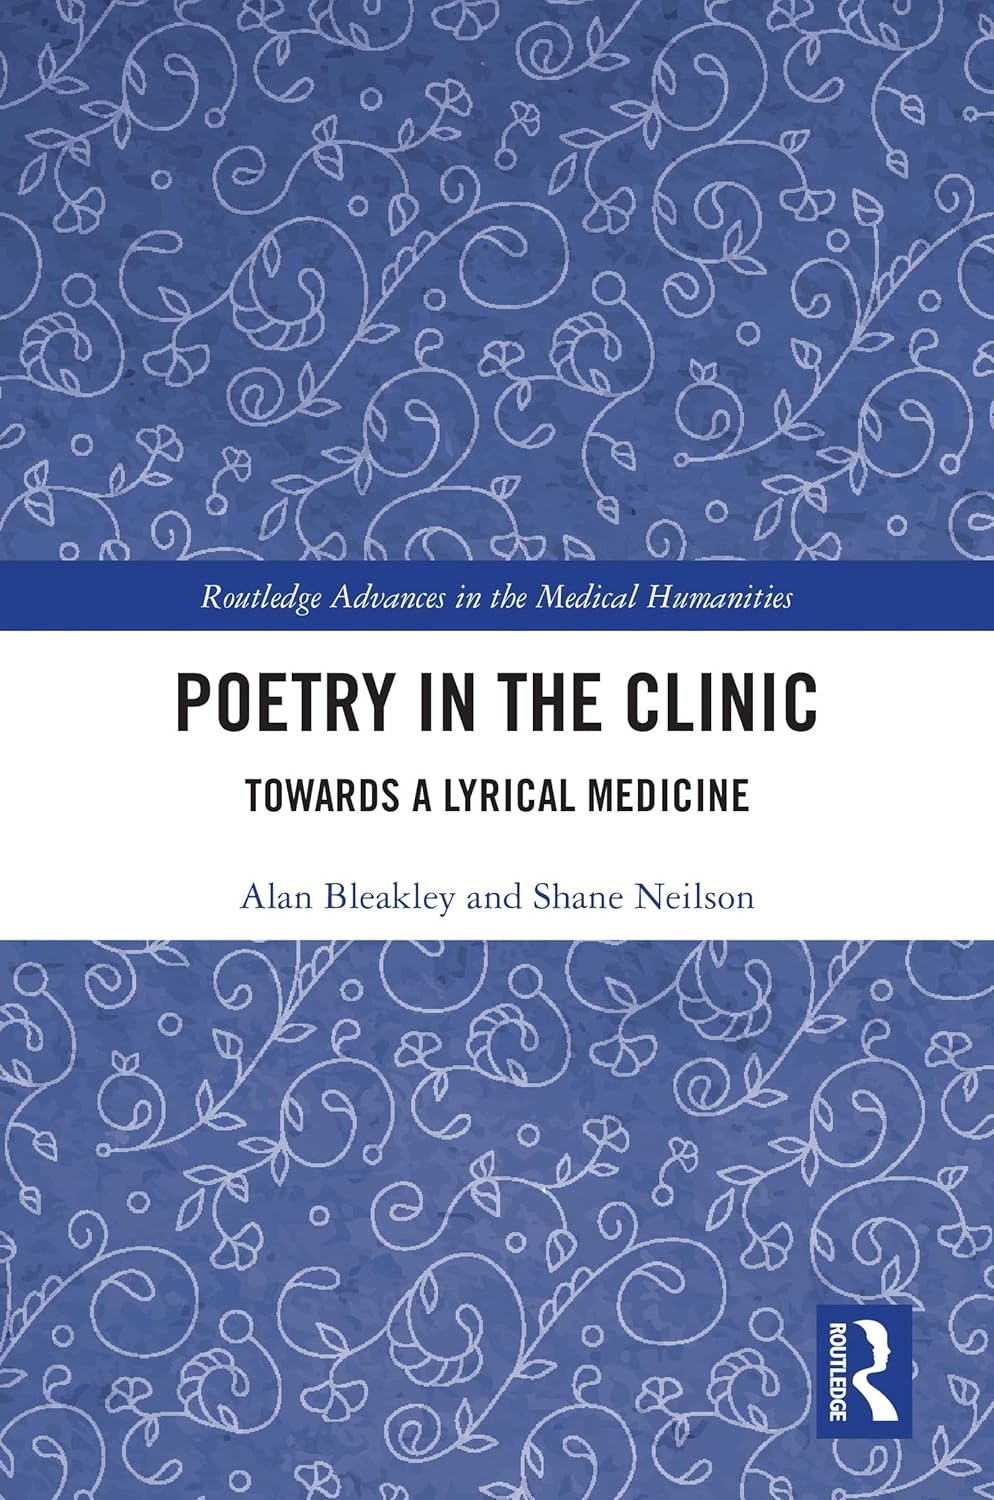 Poetry in the Clinic: Towards a Lyrical Medicine (Routledge Advances in the Medical Humanities)  by  Alan Bleakley